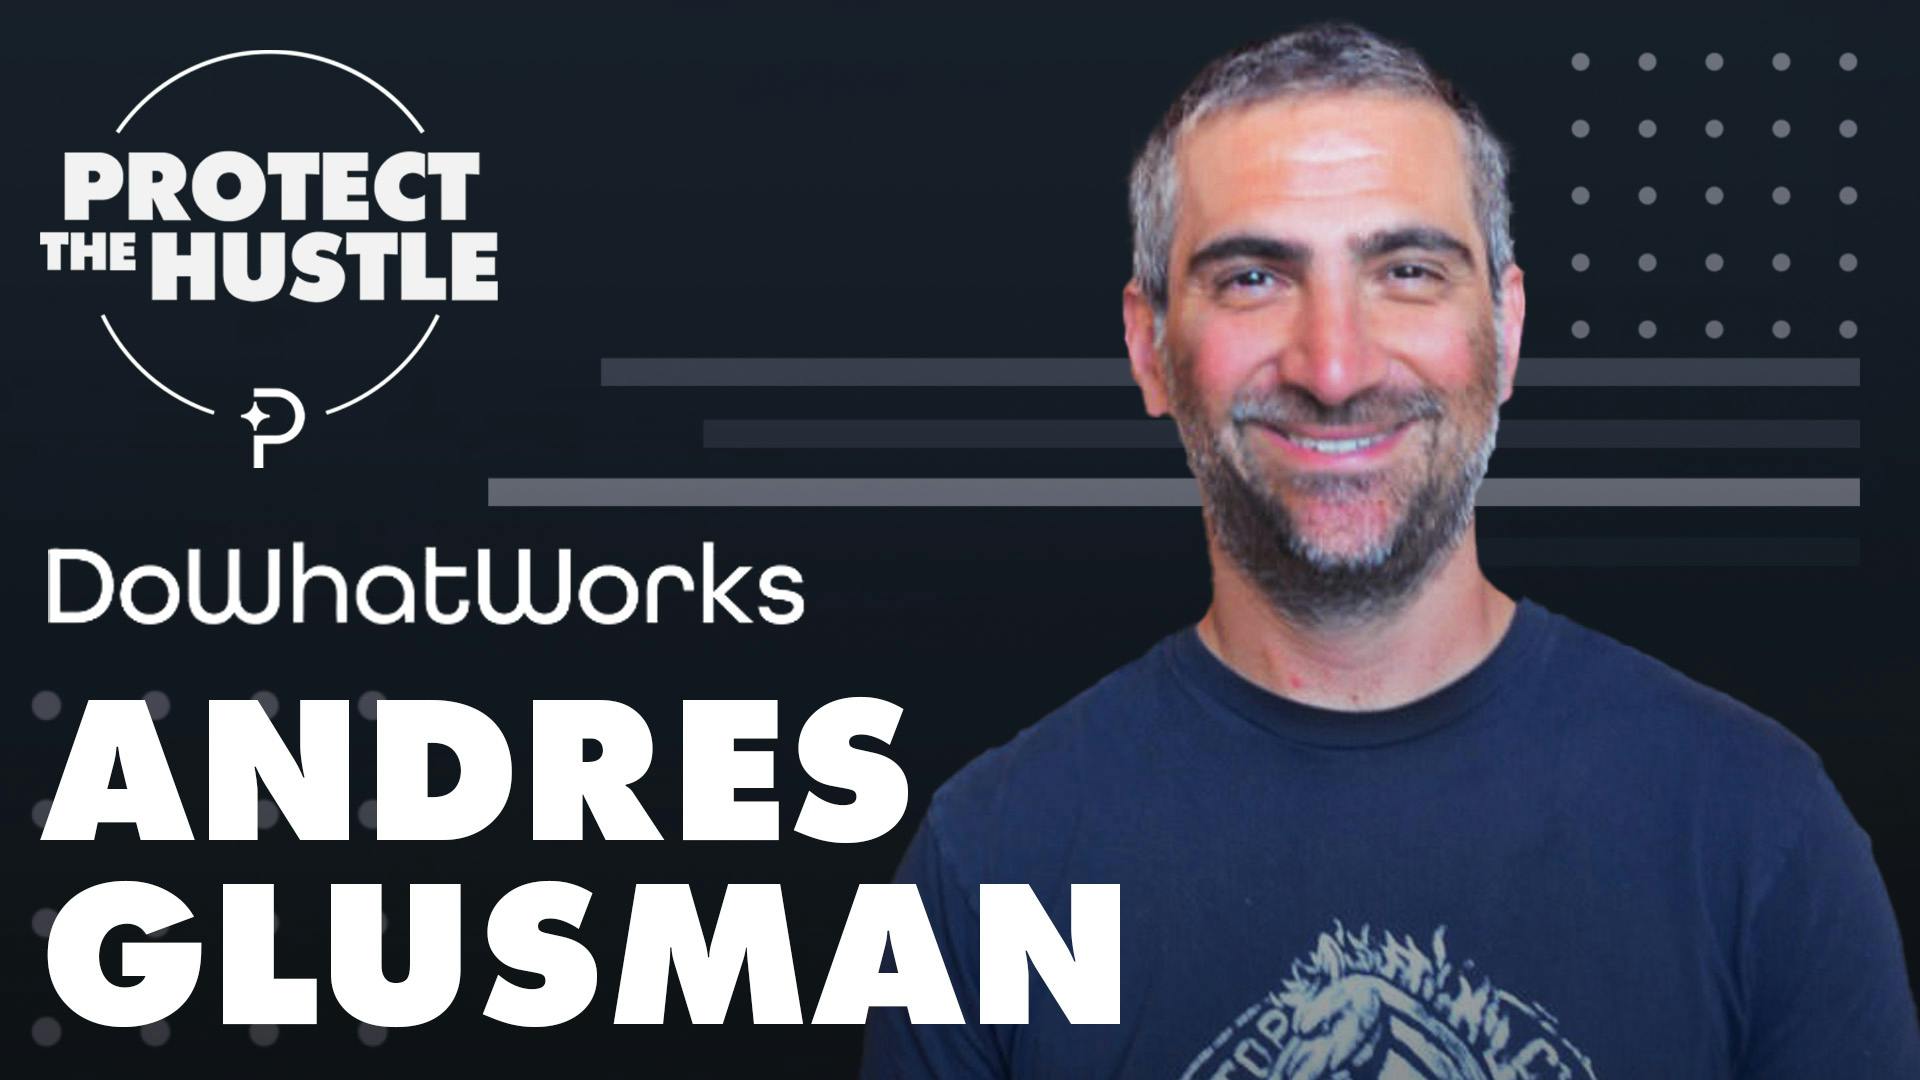 Protect the Hustle thumbnail featuring DoWhatWorks' Andres Glusman